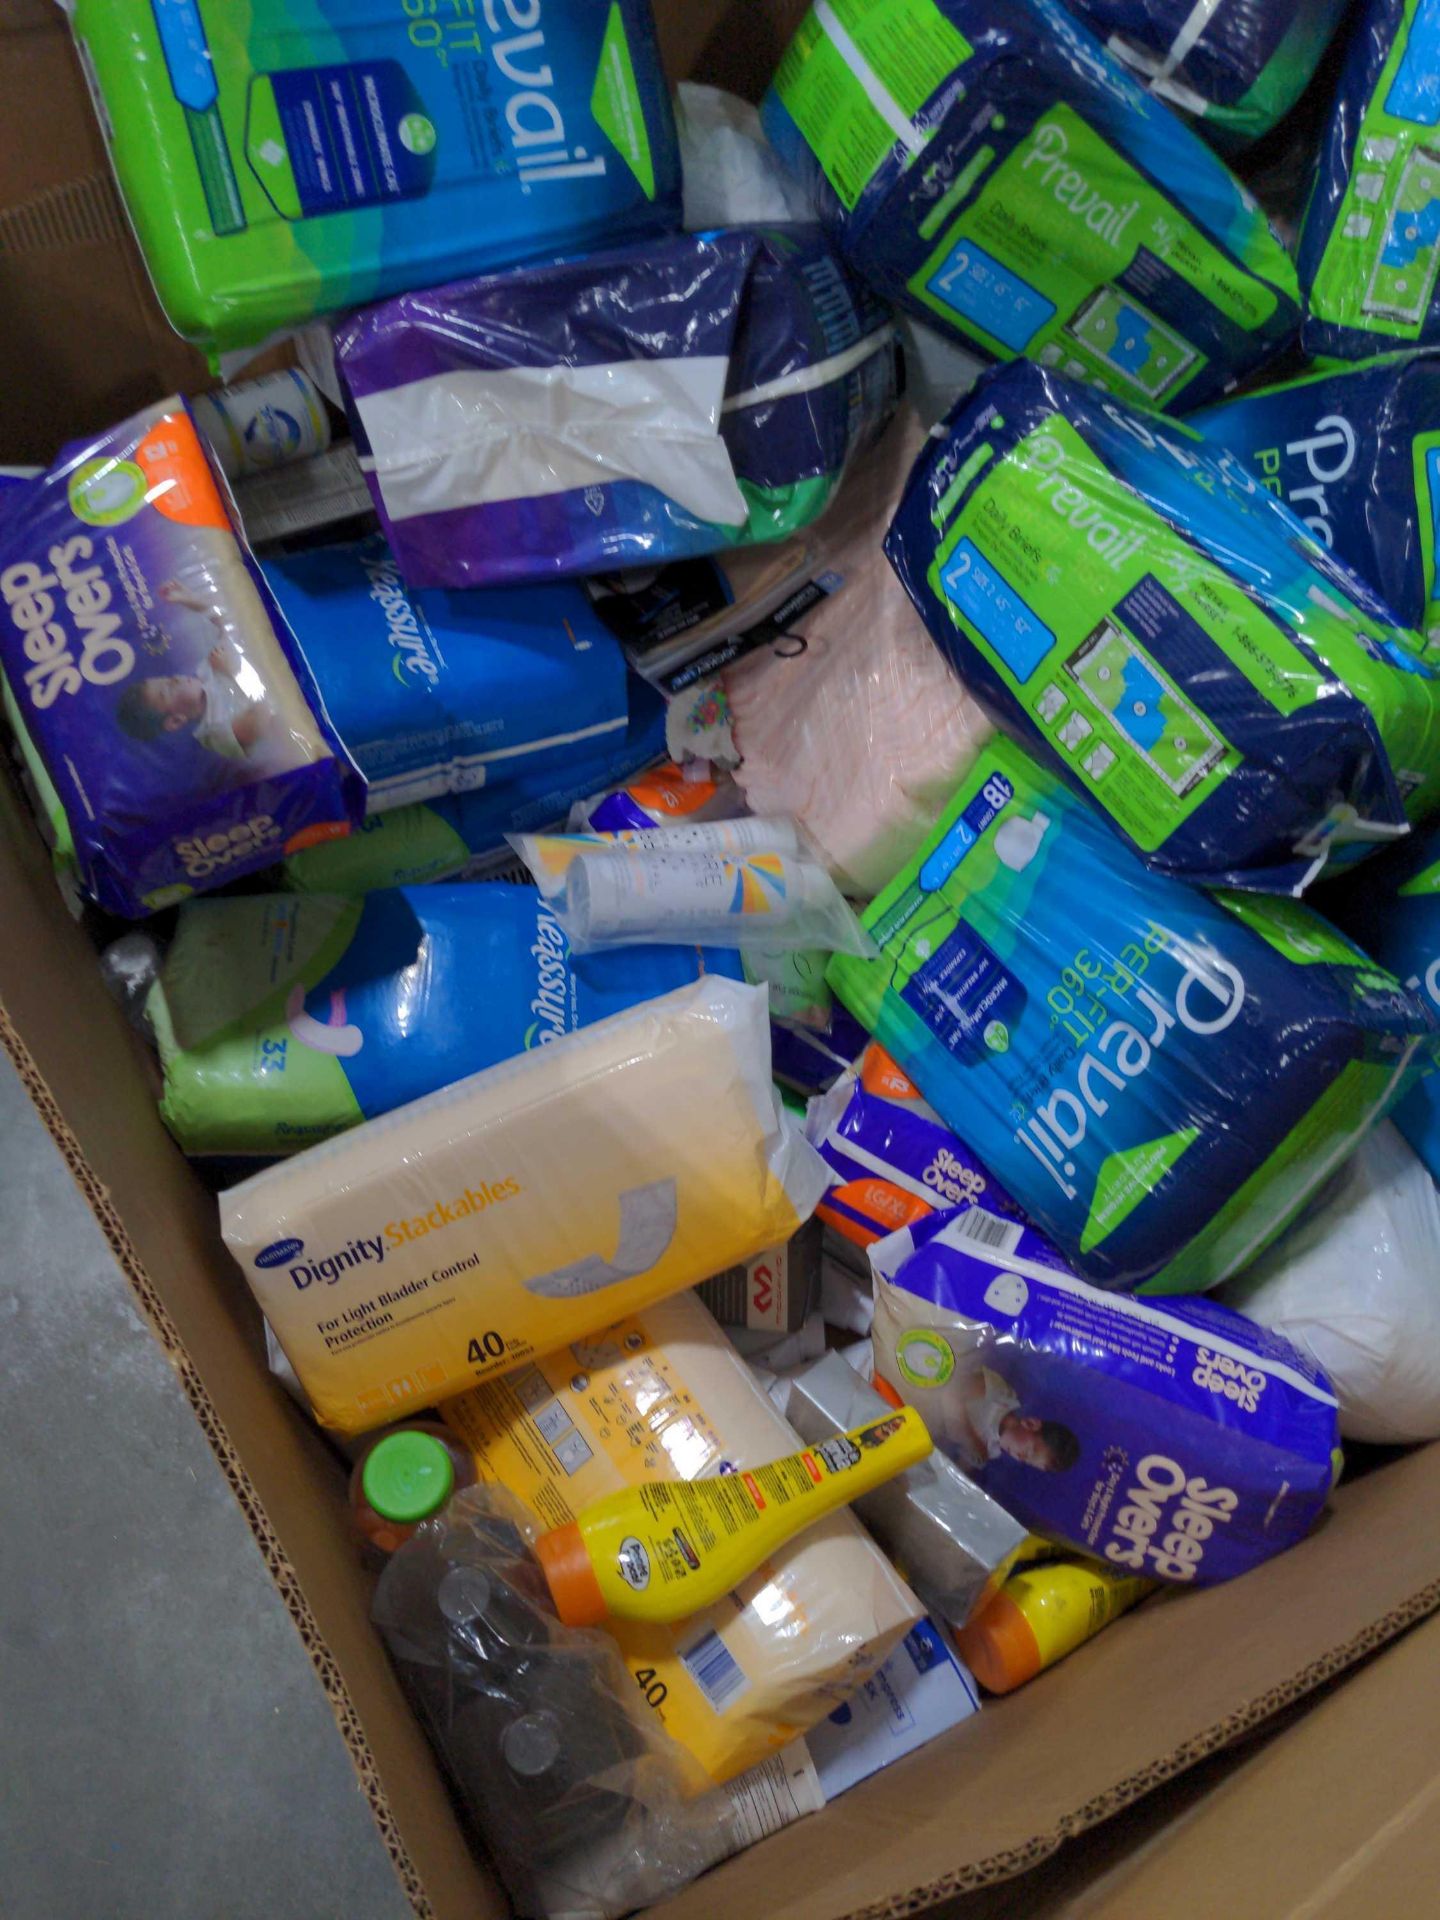 (2) Pallets of Home and garden, adult diapers and other pads, Microlife, supplements and lotions, ha - Image 8 of 24